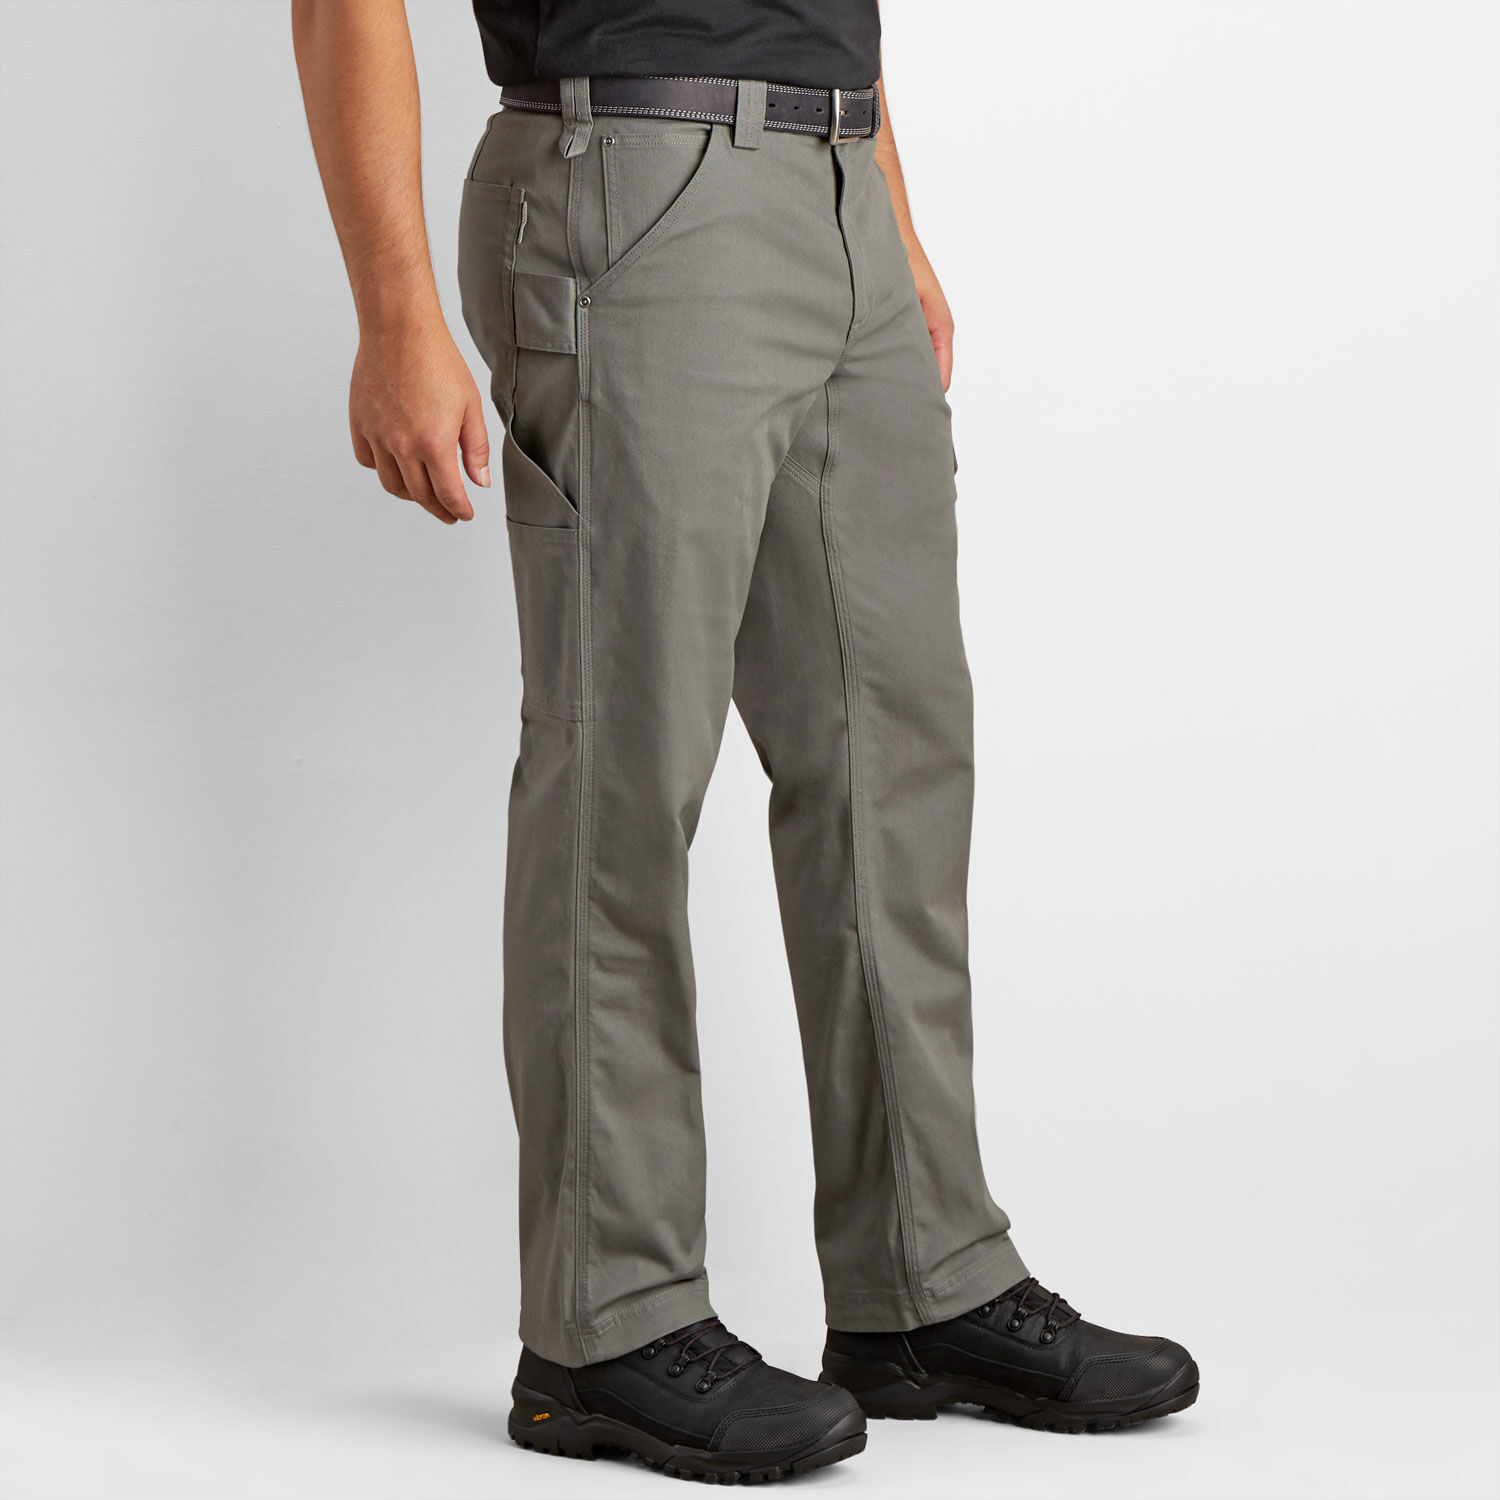 Mens Flexpedition Slim Fit Cargo Pants  Duluth Trading Company